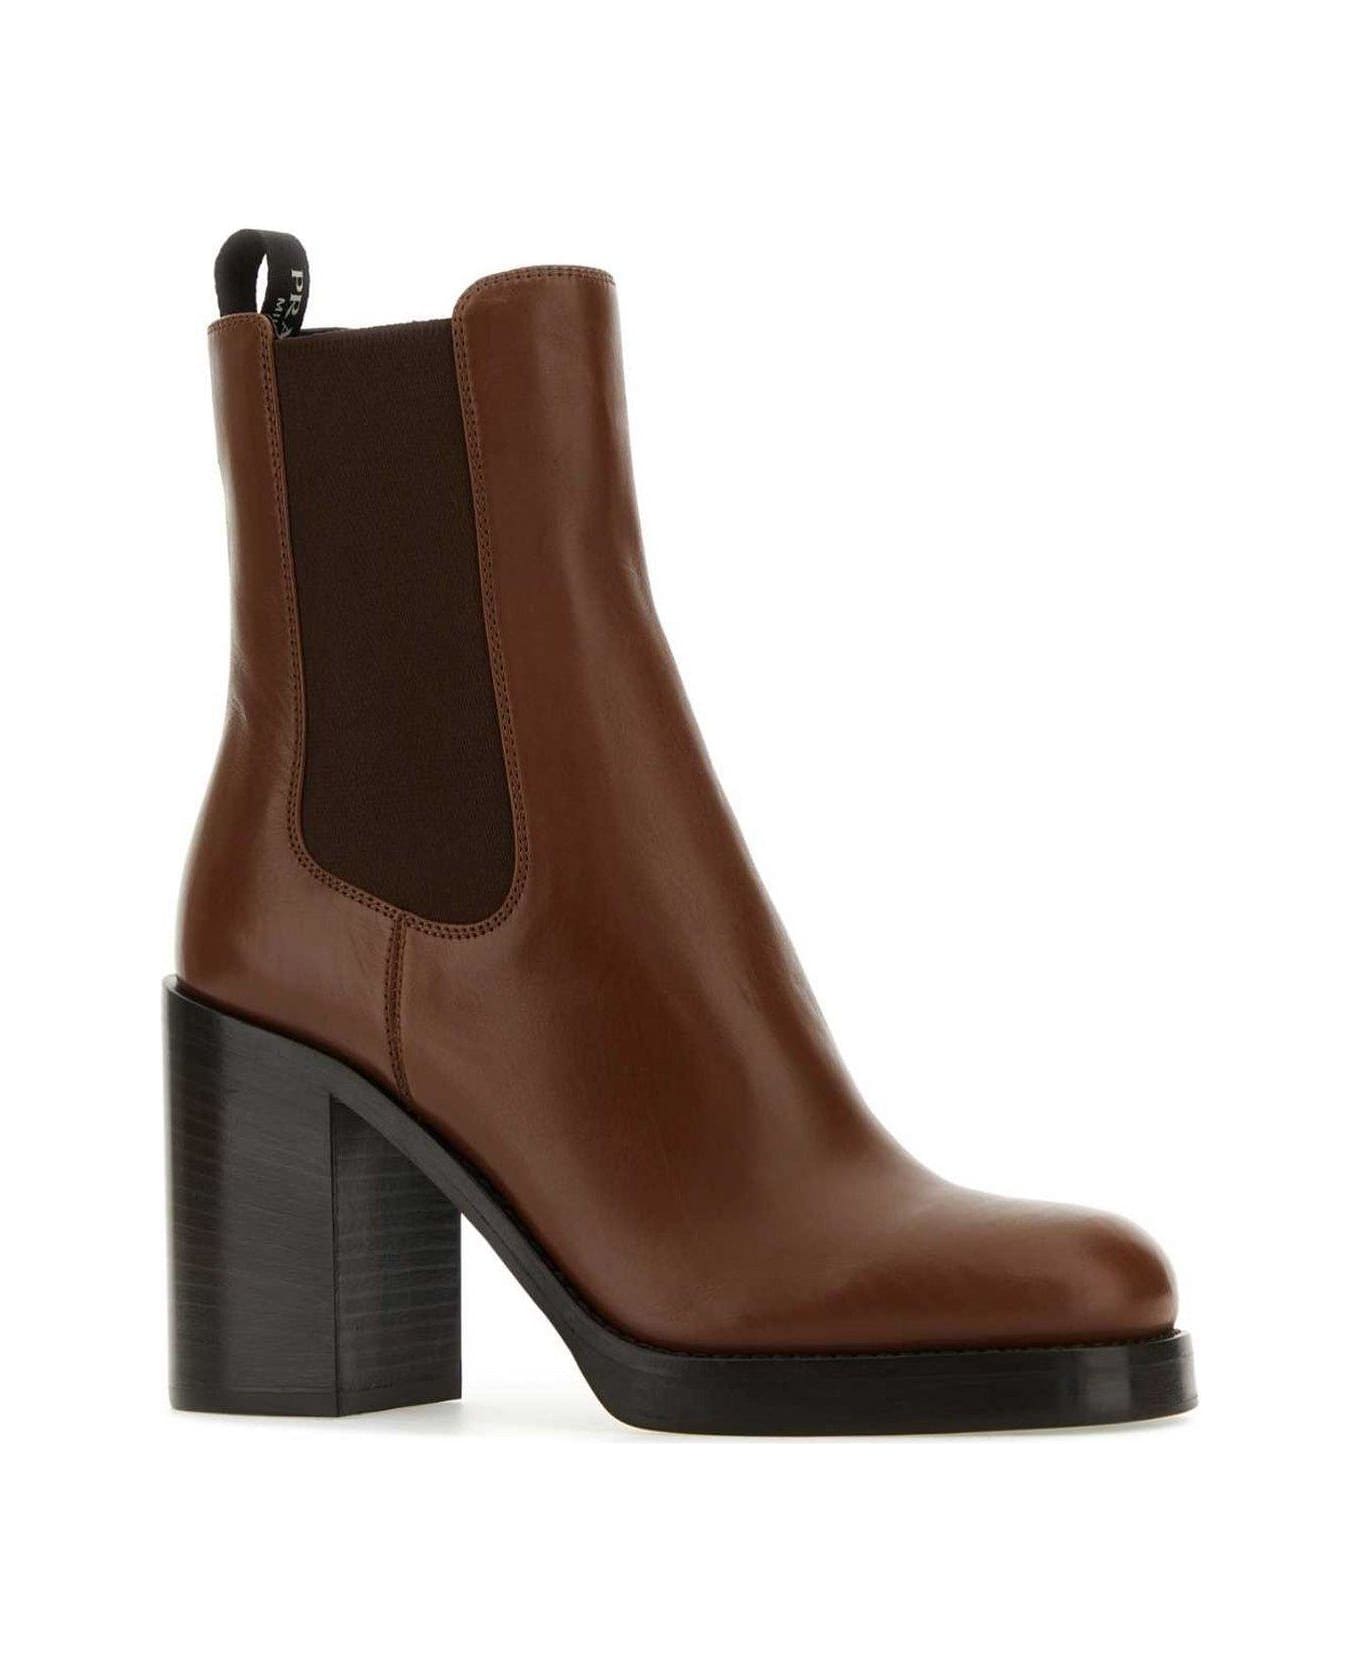 Prada Rounded-toe Ankle Boots - COGNAC